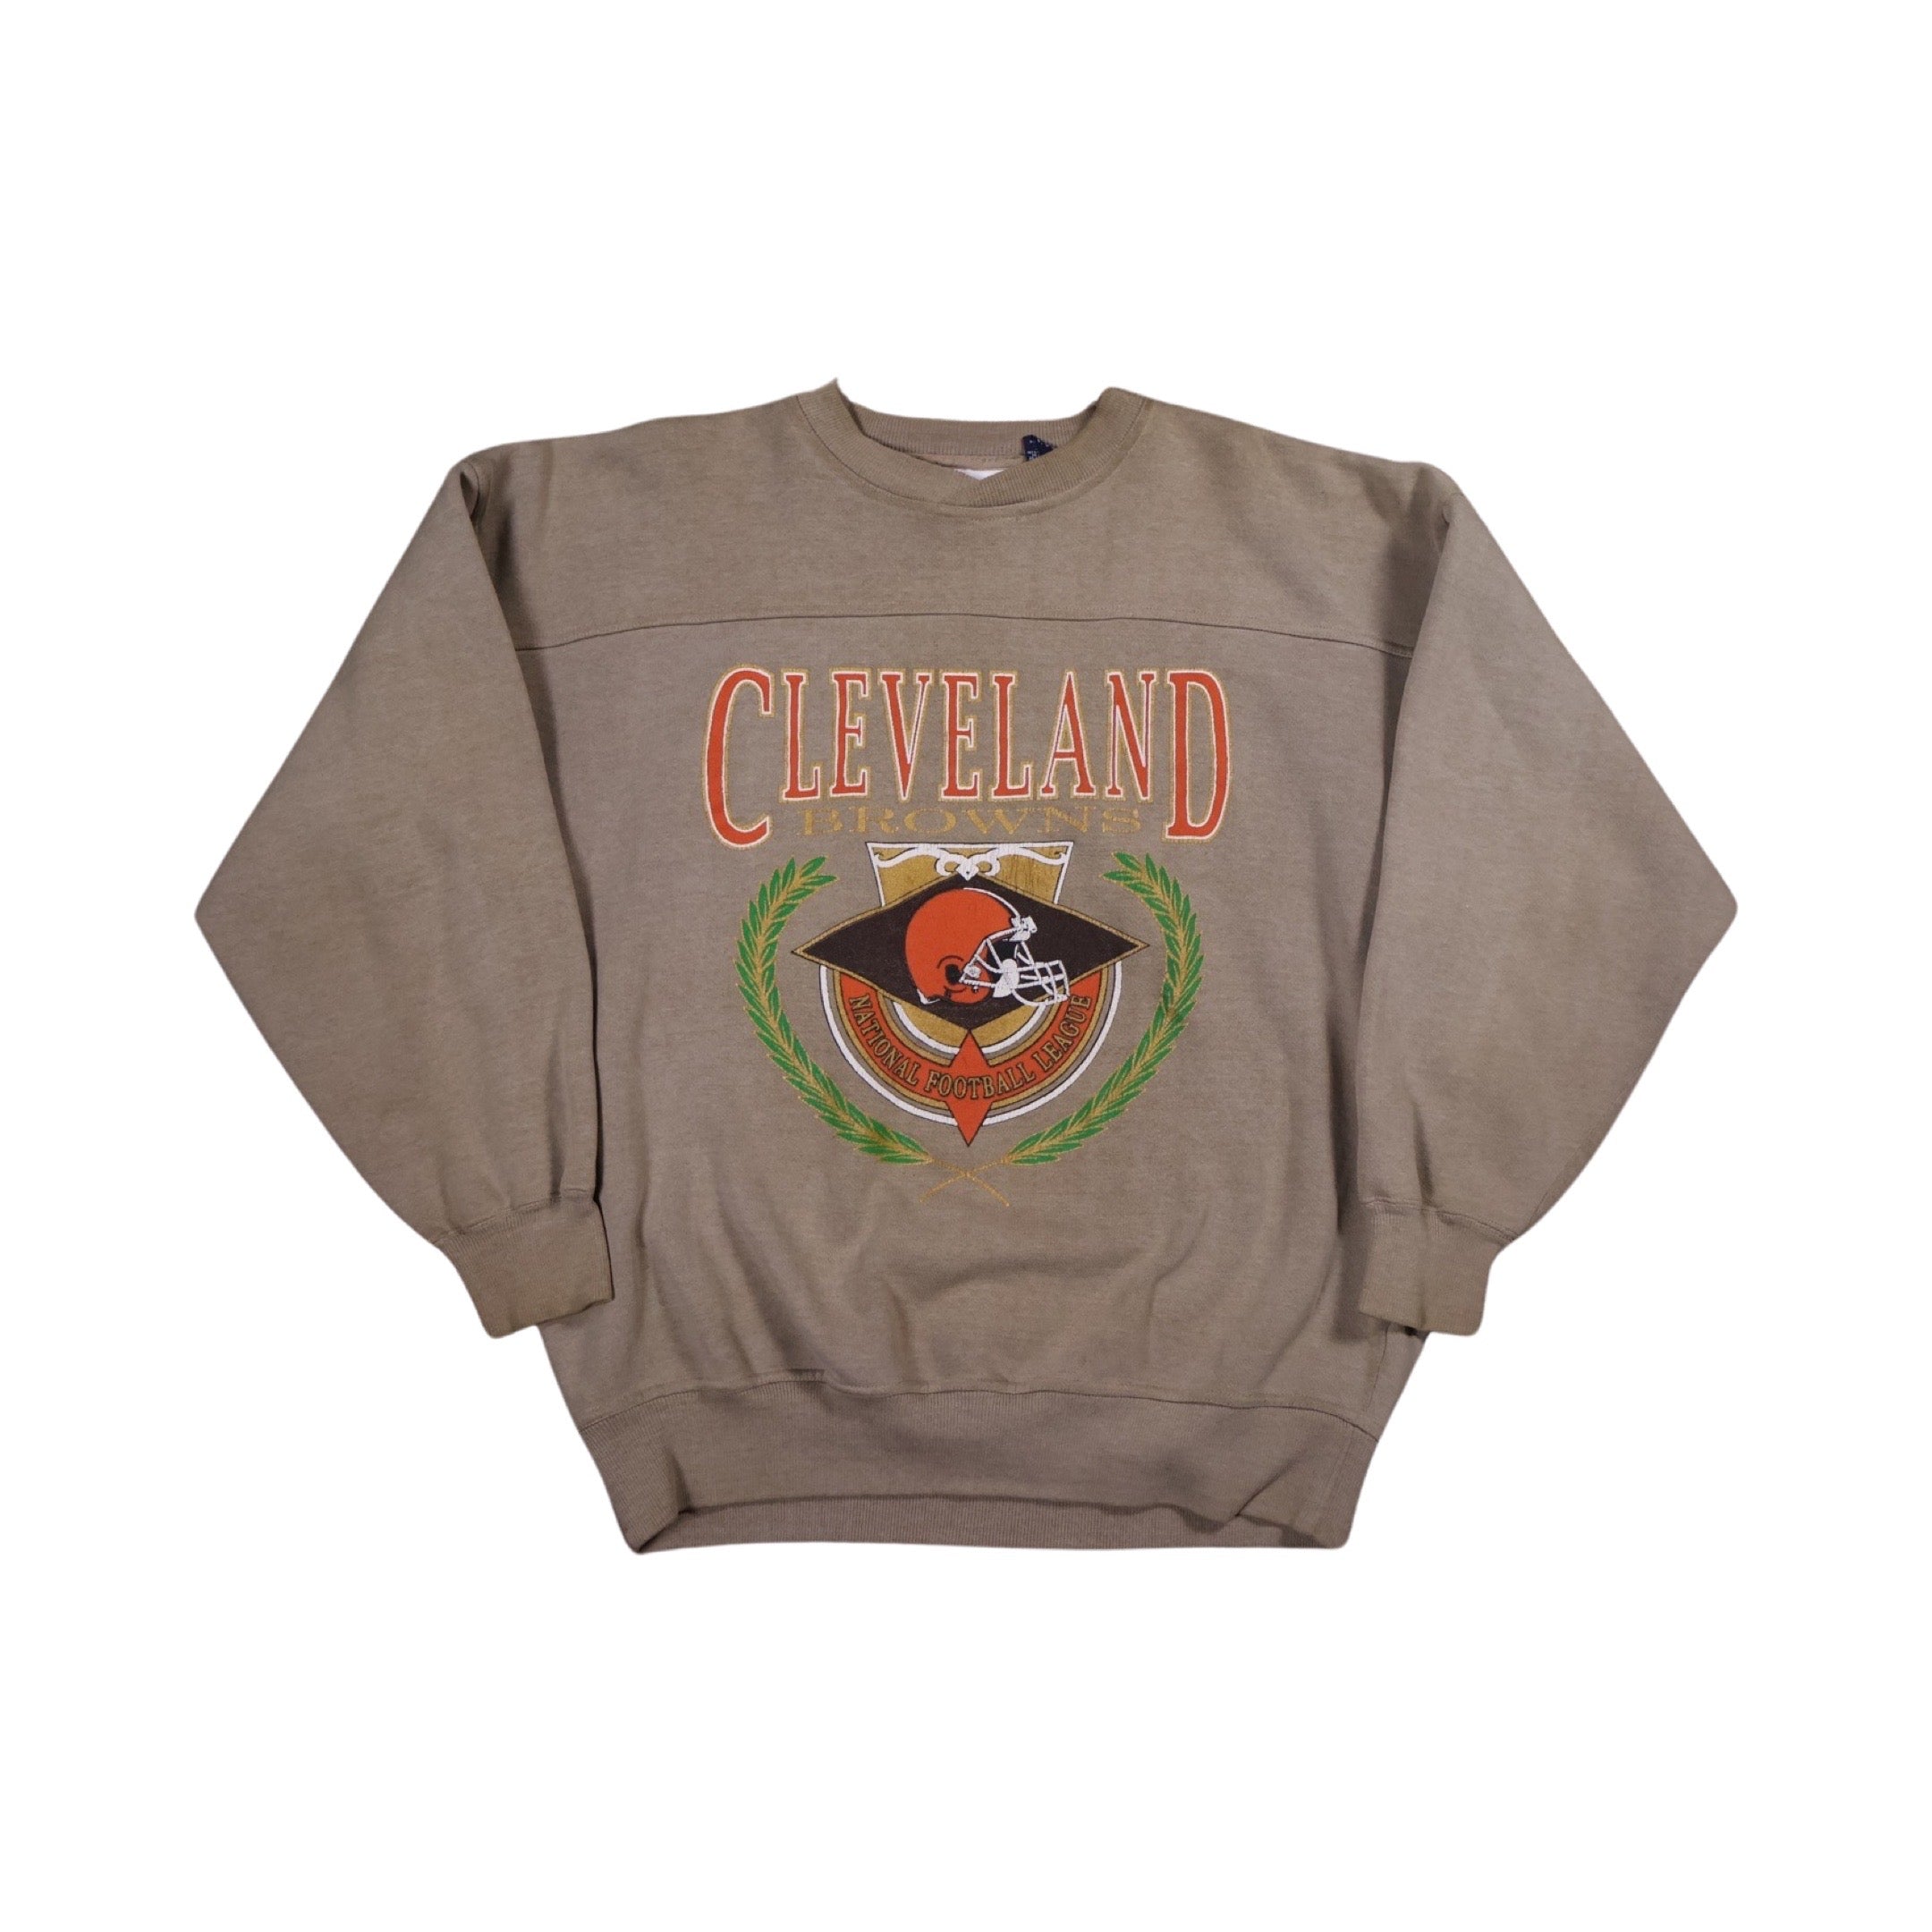 Cleveland Browns 90s Tan Sweater (XL)